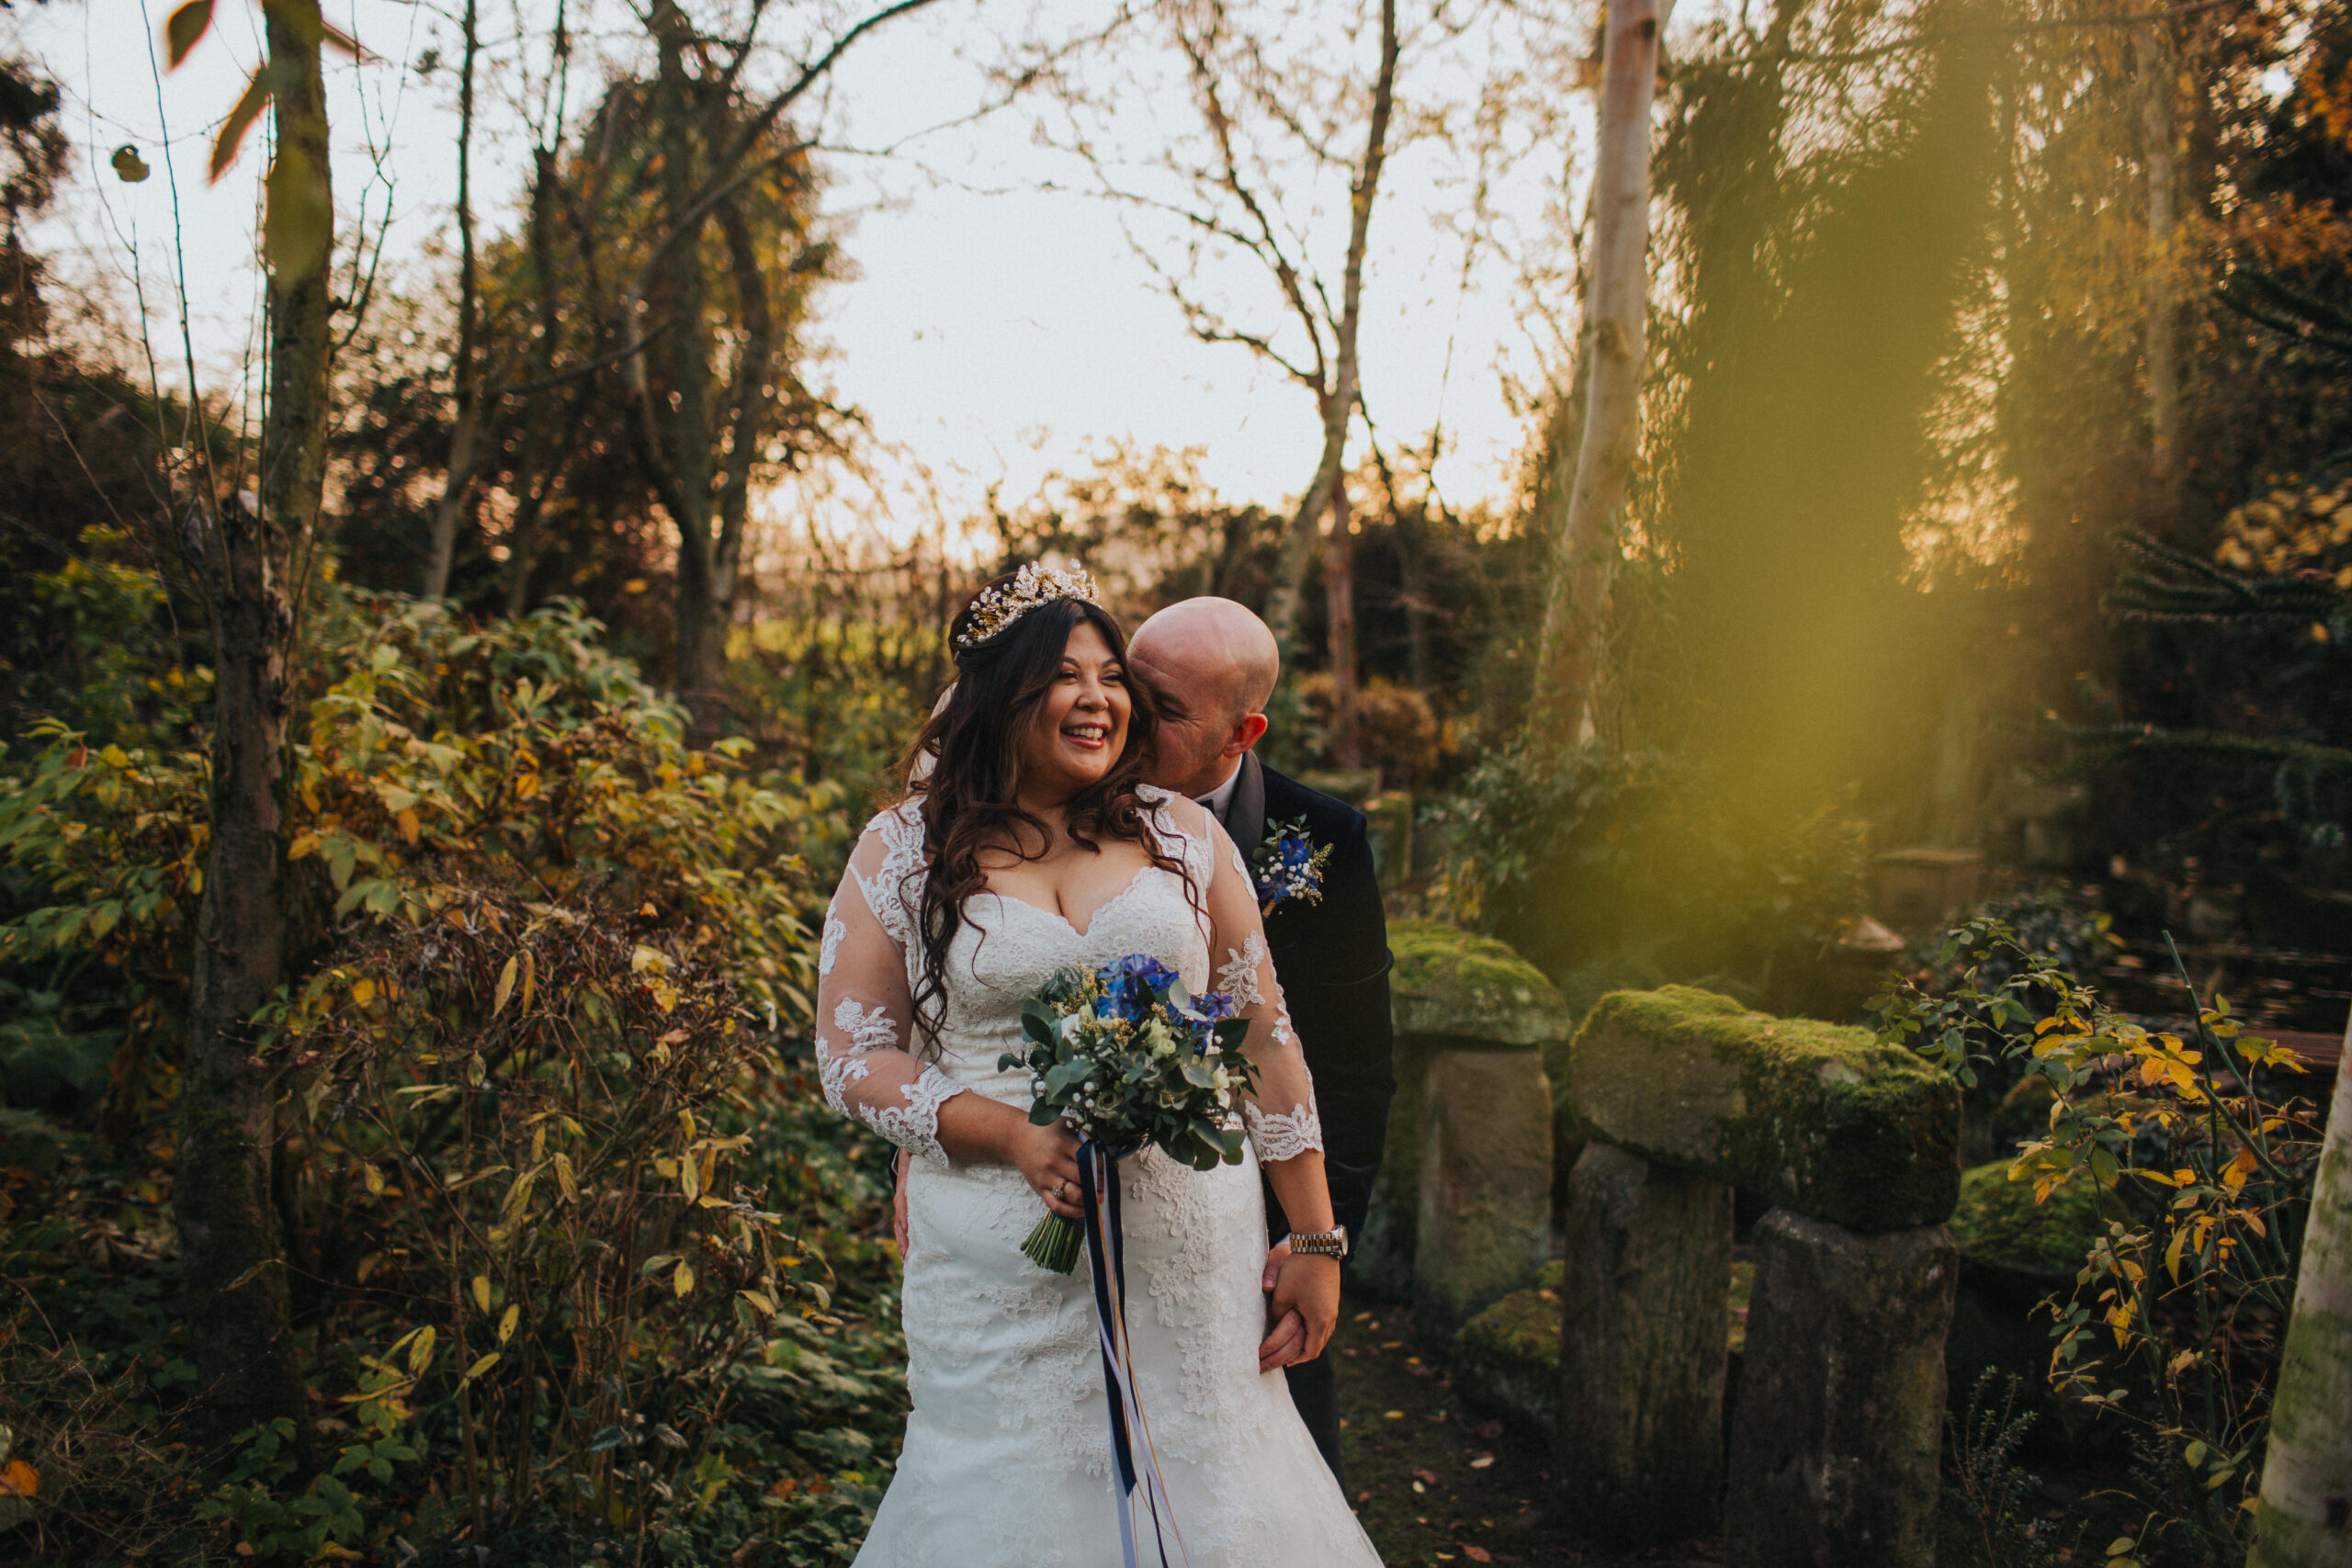 Cosy November vows at The Hundred House Hotel